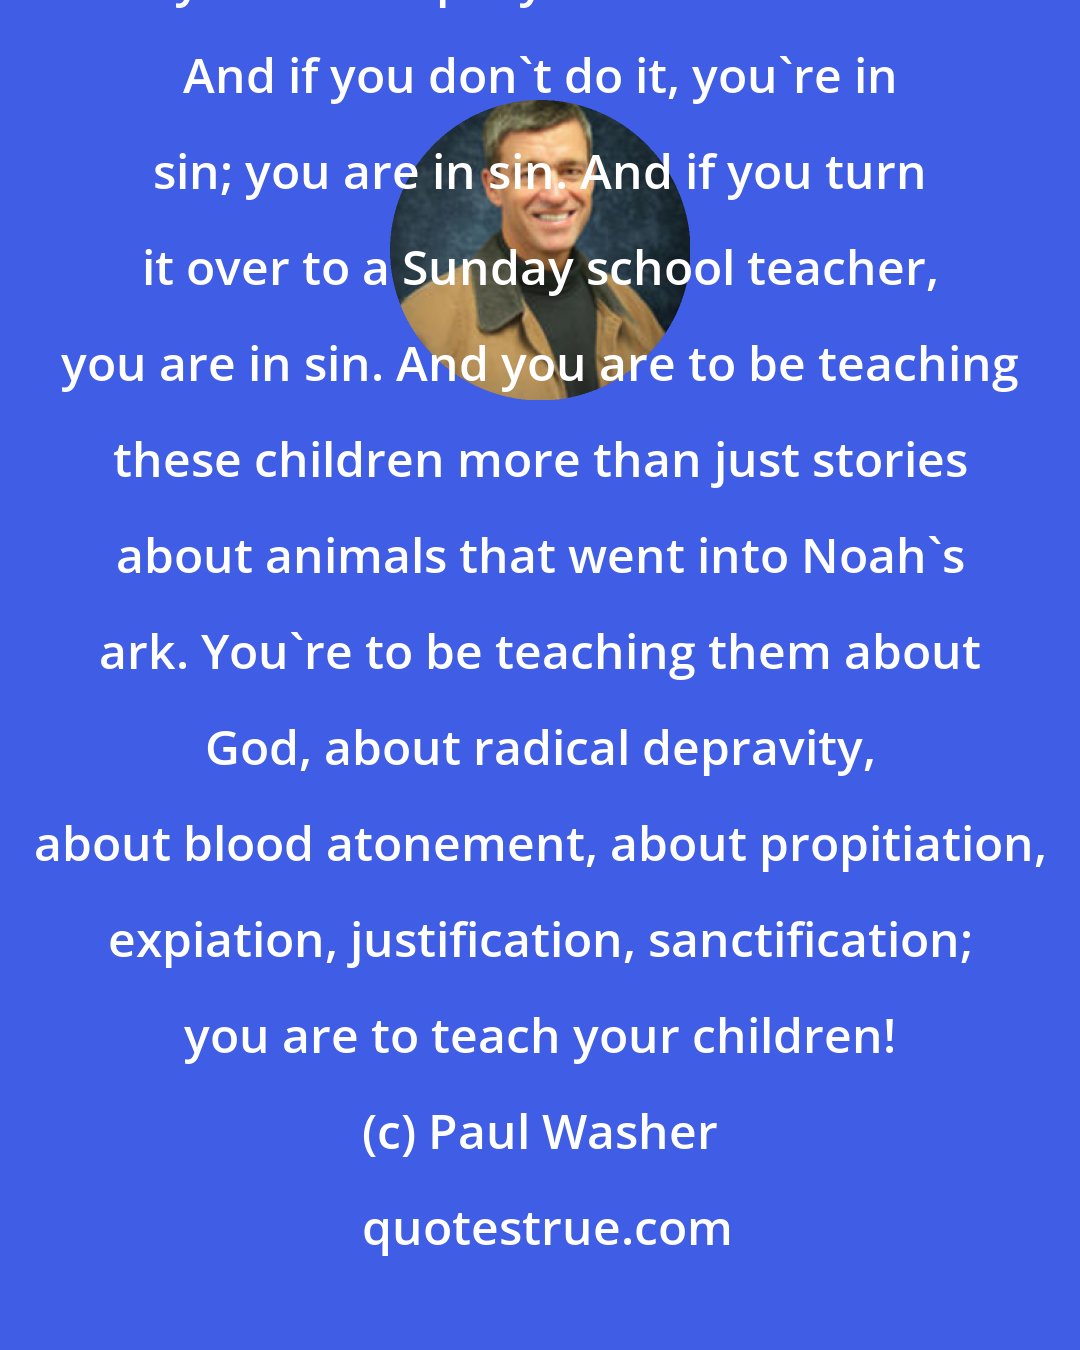 Paul Washer: Men, your primary responsibility in your home, after your wife, is you to disciple your own children. And if you don't do it, you're in sin; you are in sin. And if you turn it over to a Sunday school teacher, you are in sin. And you are to be teaching these children more than just stories about animals that went into Noah's ark. You're to be teaching them about God, about radical depravity, about blood atonement, about propitiation, expiation, justification, sanctification; you are to teach your children!